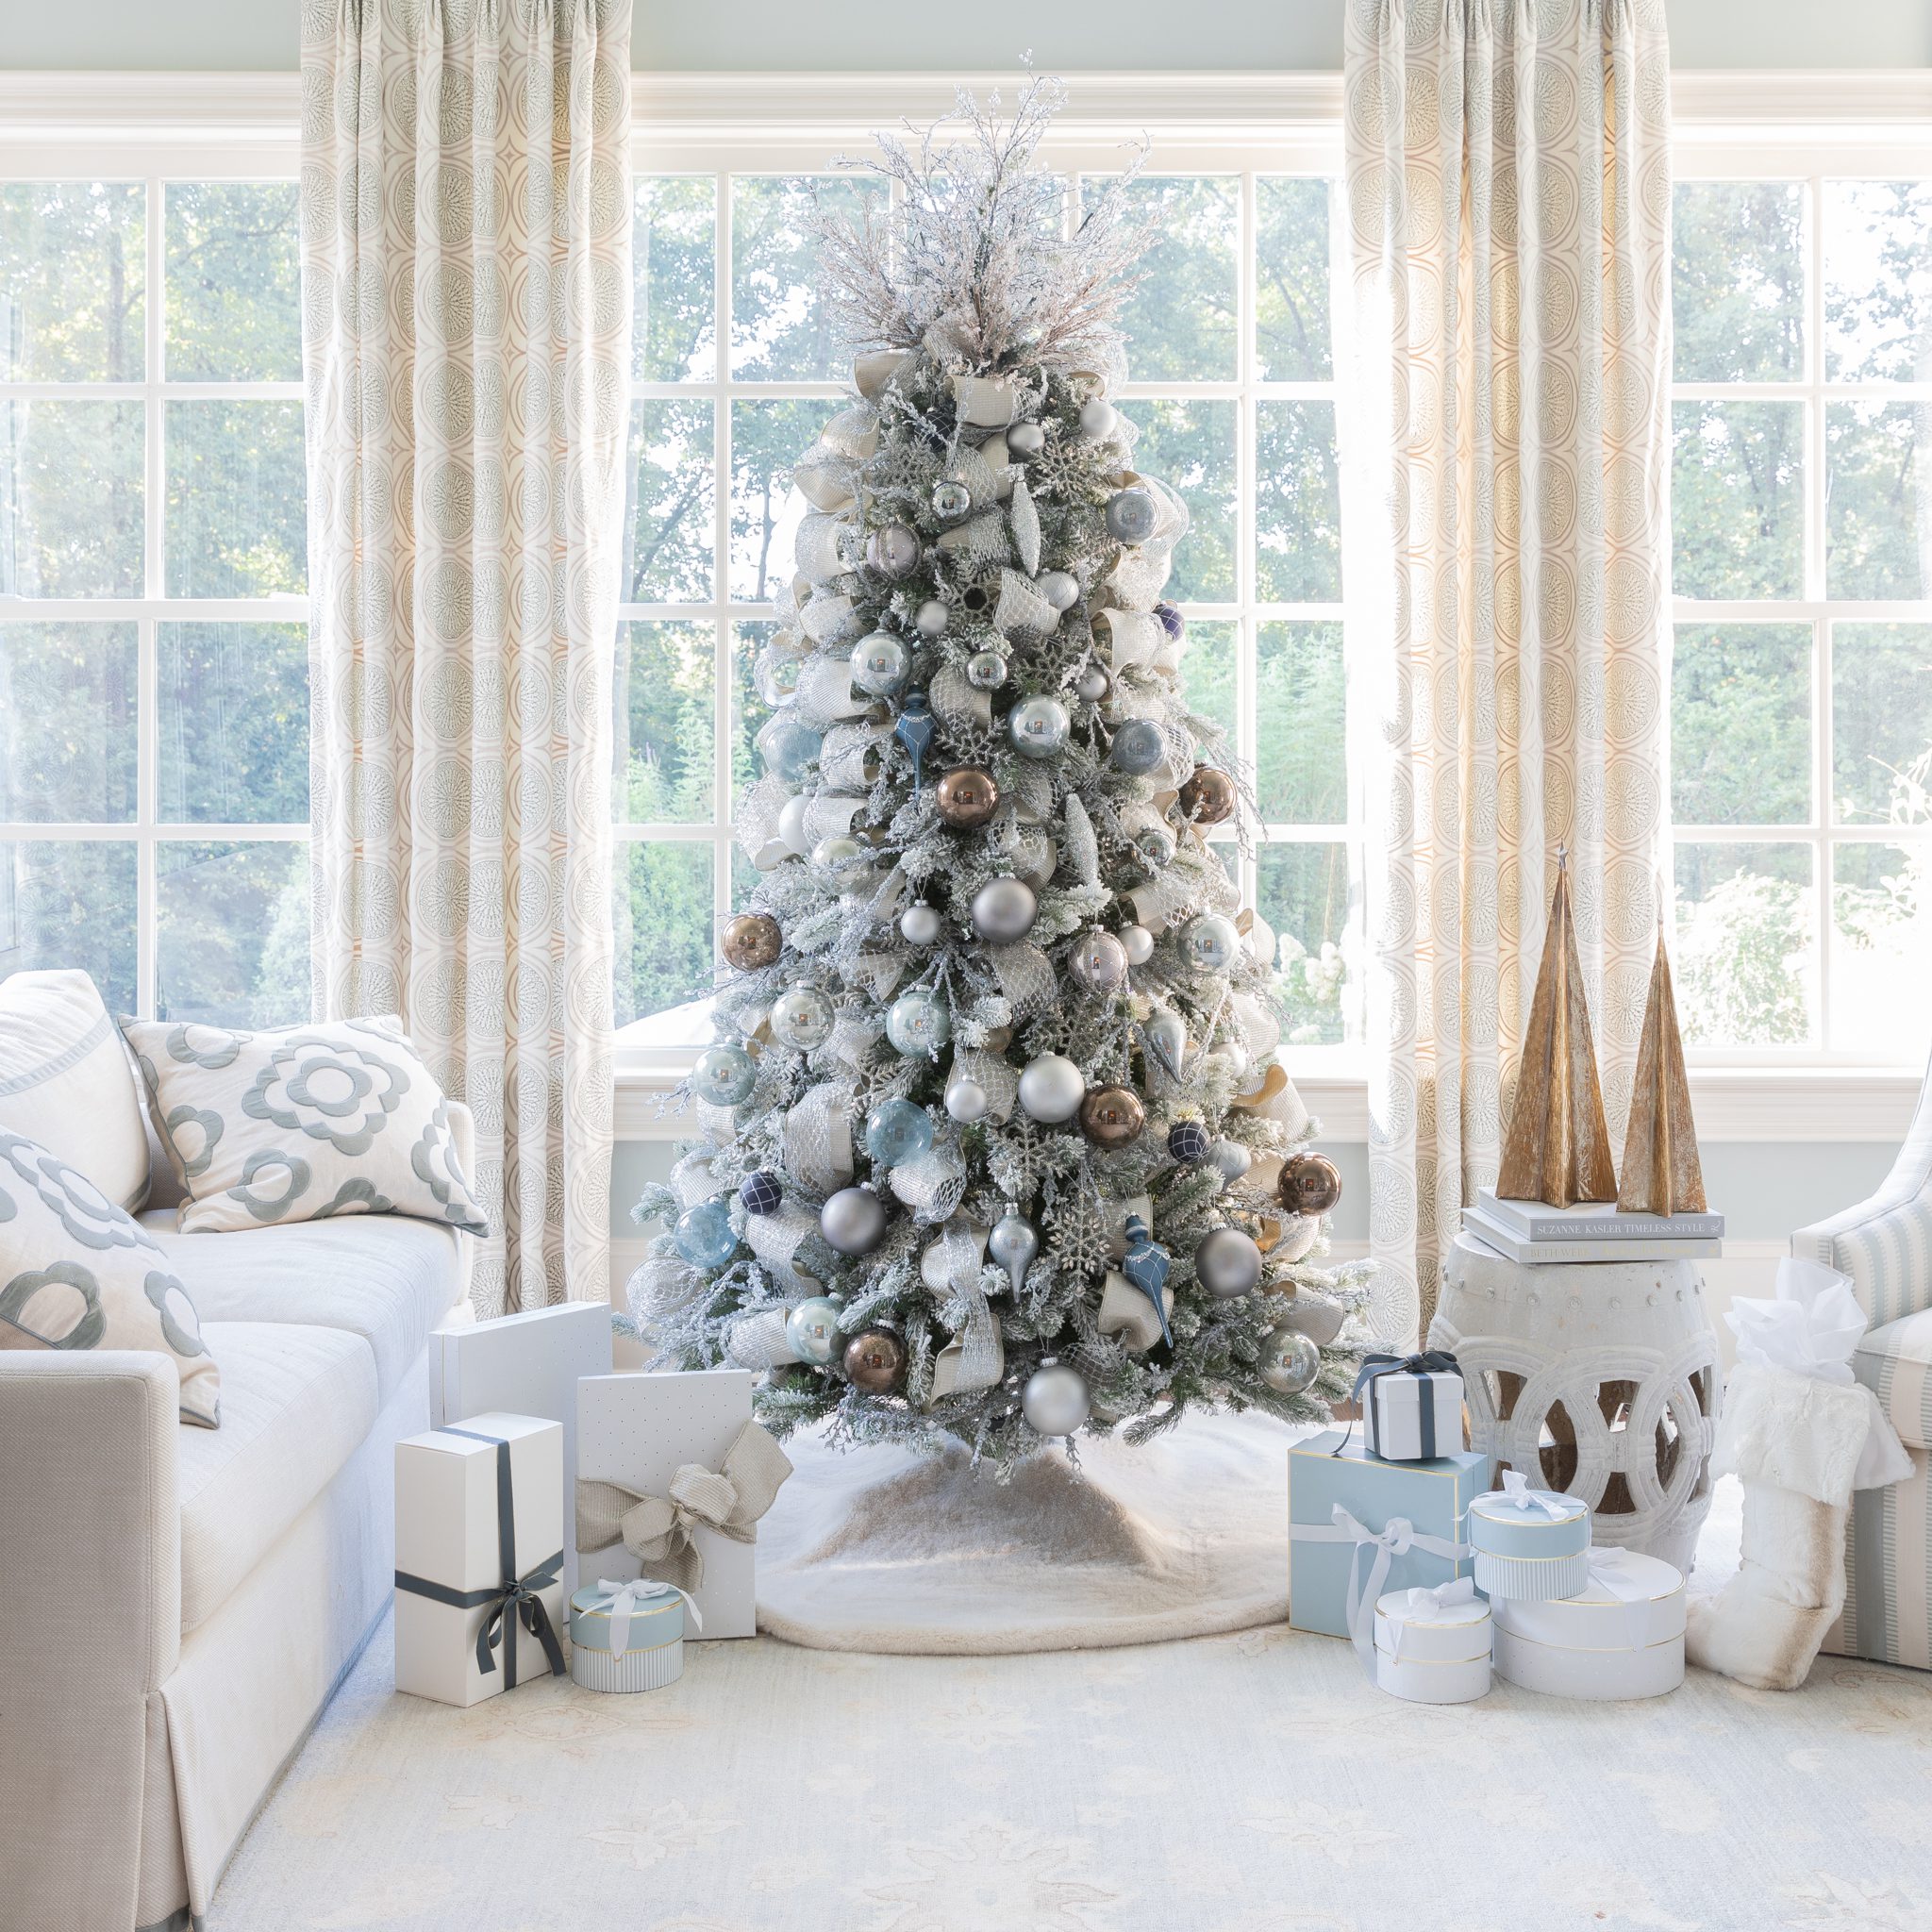 Flocked Christmas tree covered in blue, silver, brown, and gray ornaments and ribbon.